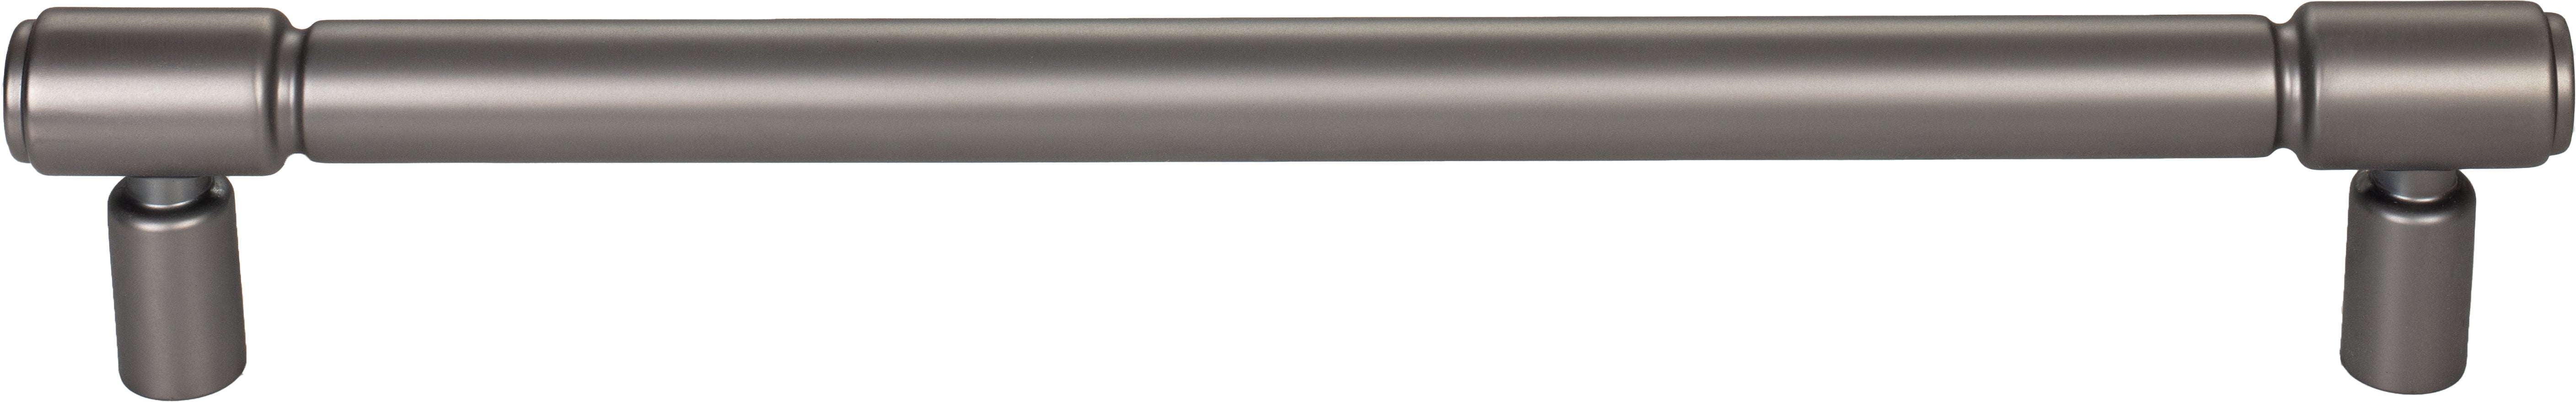 Clarence Appliance Pull 12 Inch (c-c)